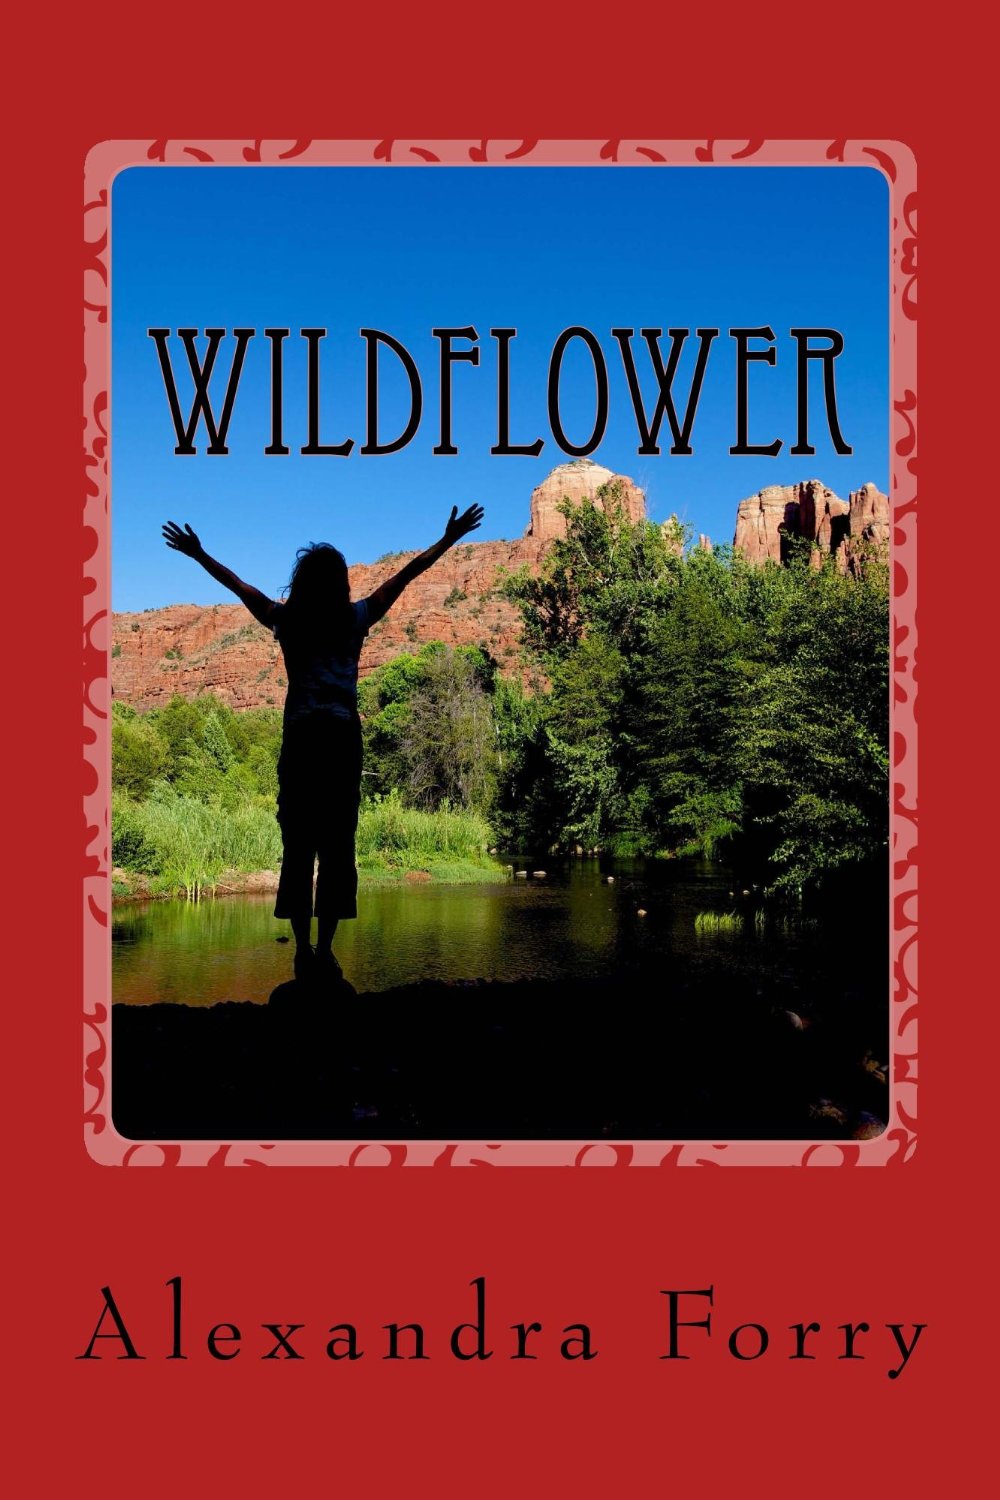 Book Tour: Wildflower by Alexandra Forry